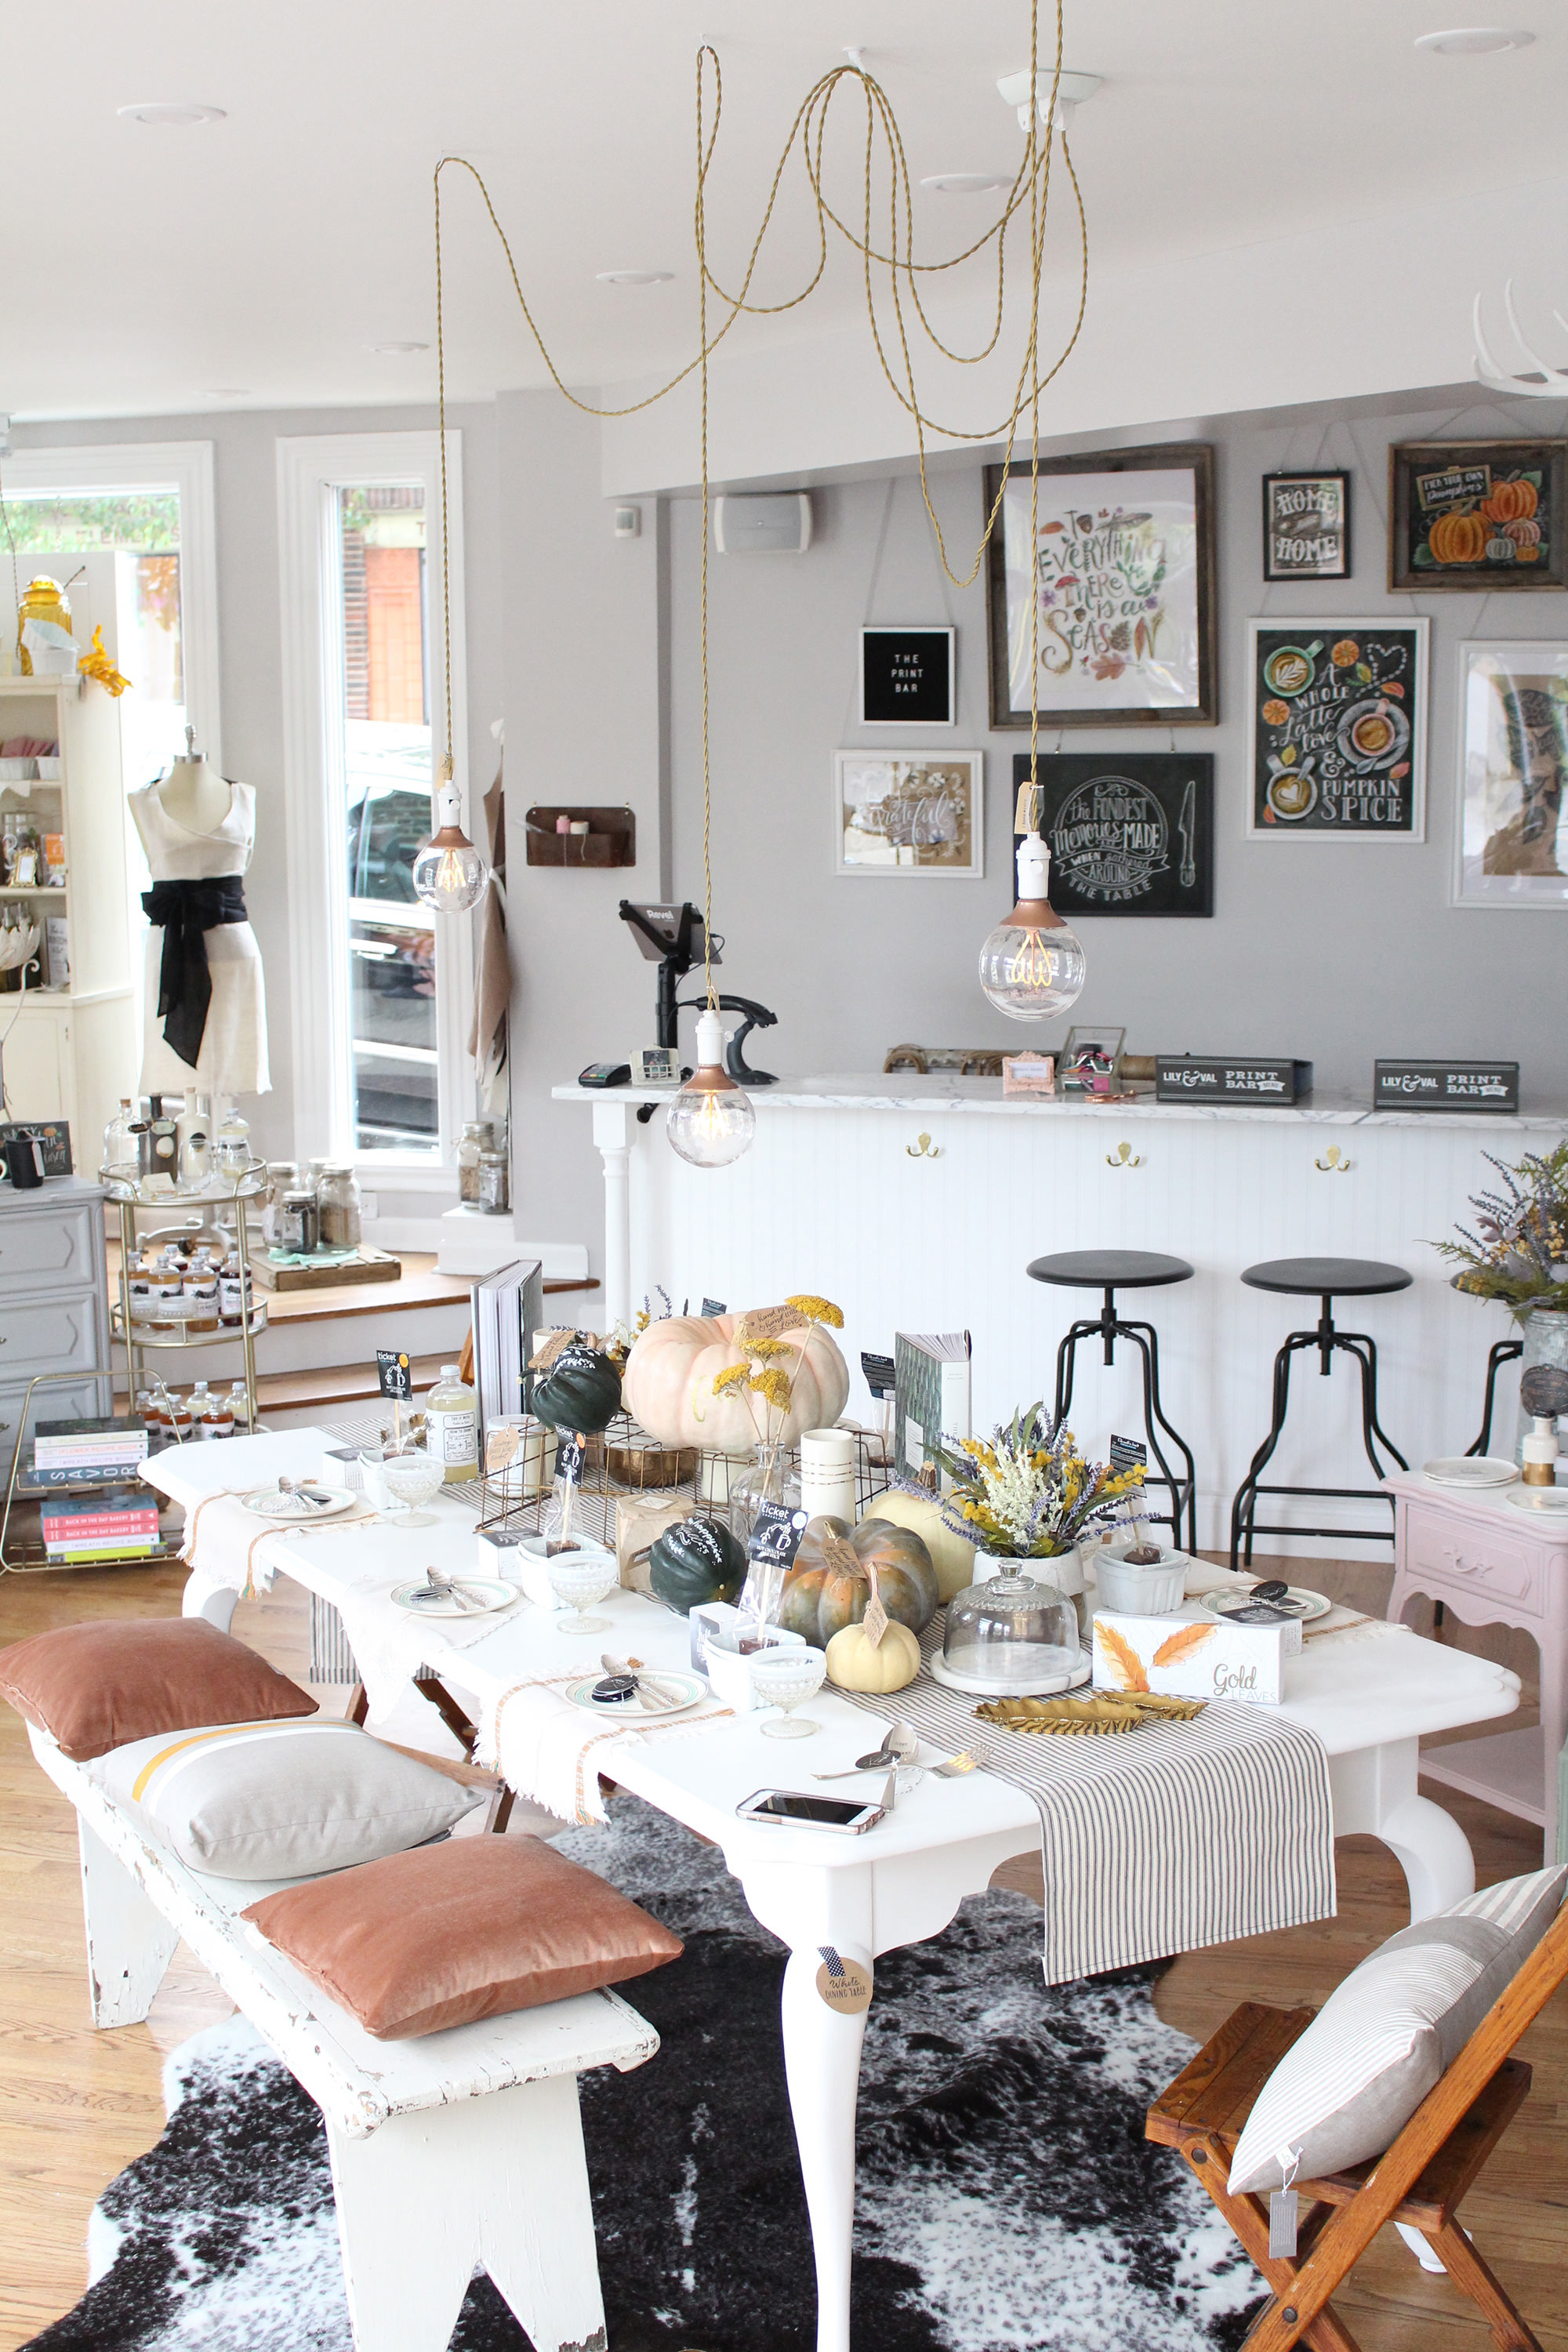 Lily & Val's brick and mortar store is located in the Shadyside neighborhood of Pittsburgh, PA